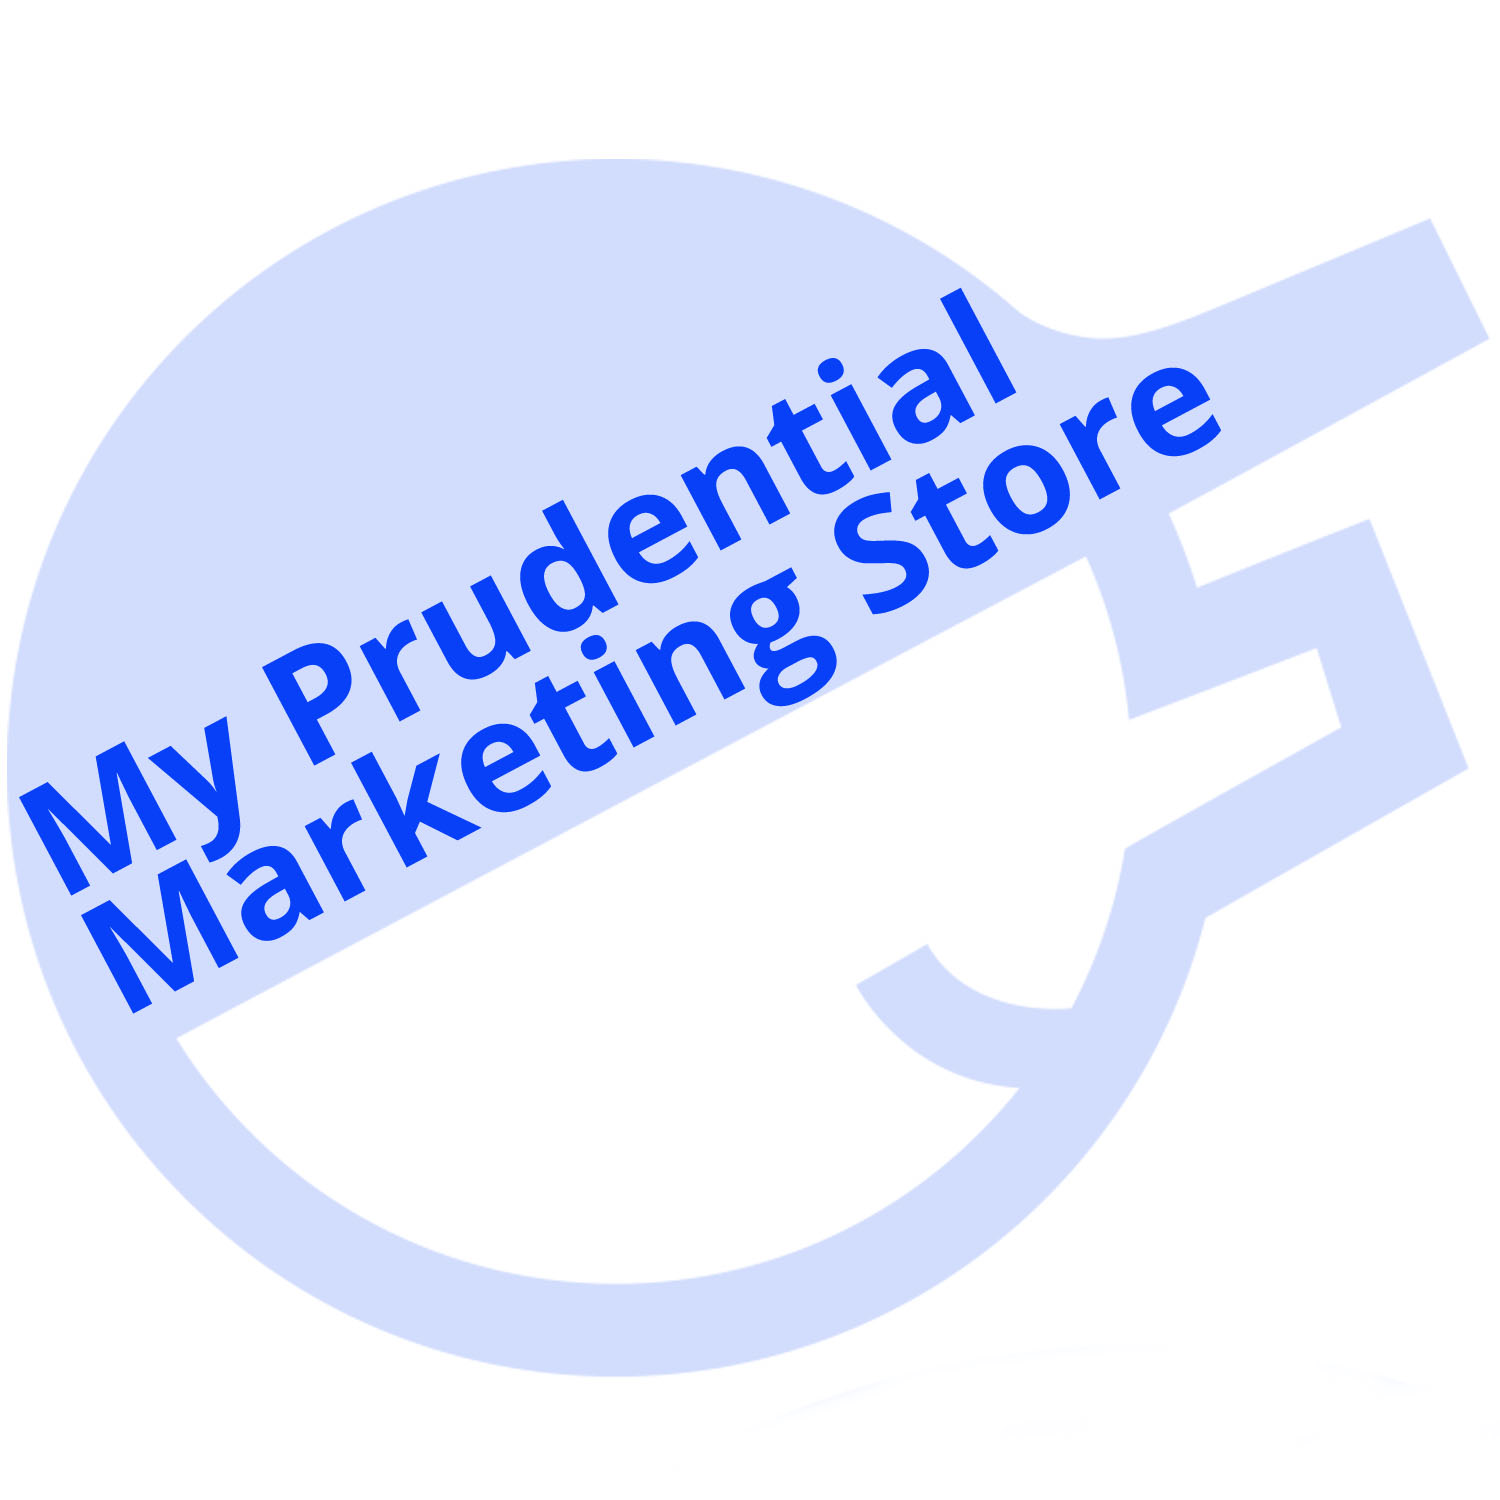 My Prudential Marketing Store